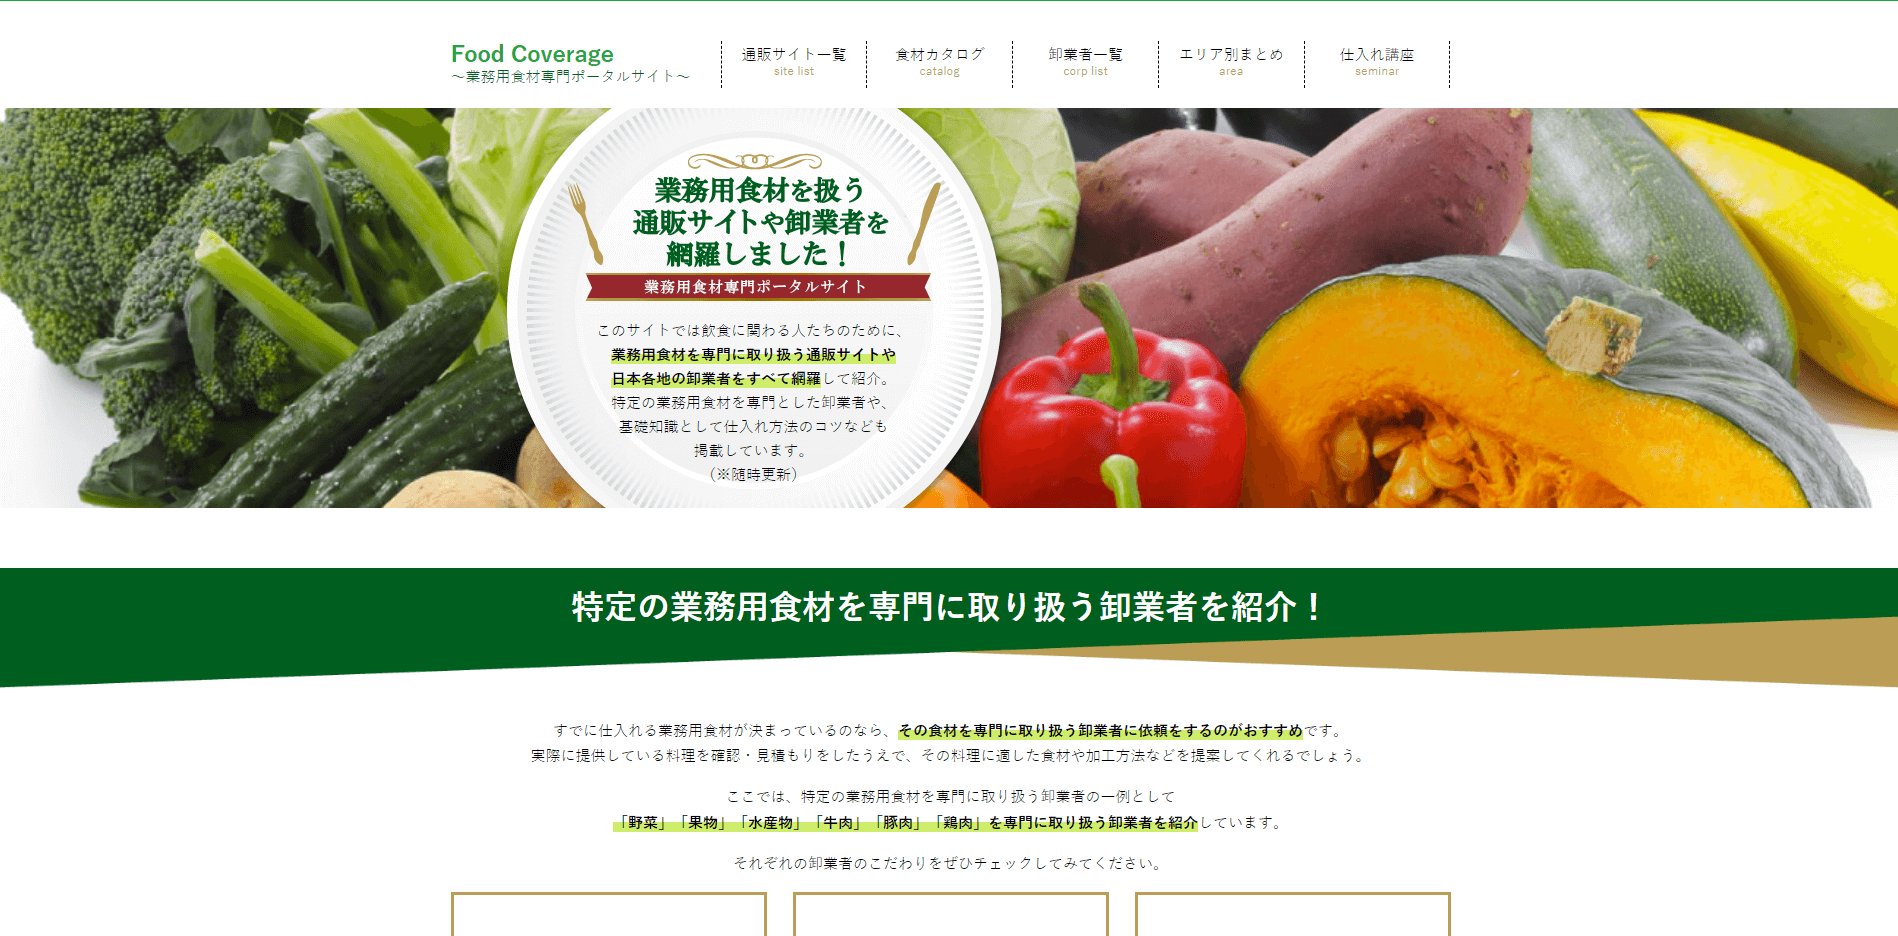 Food Coverage<br>お問い合わせ